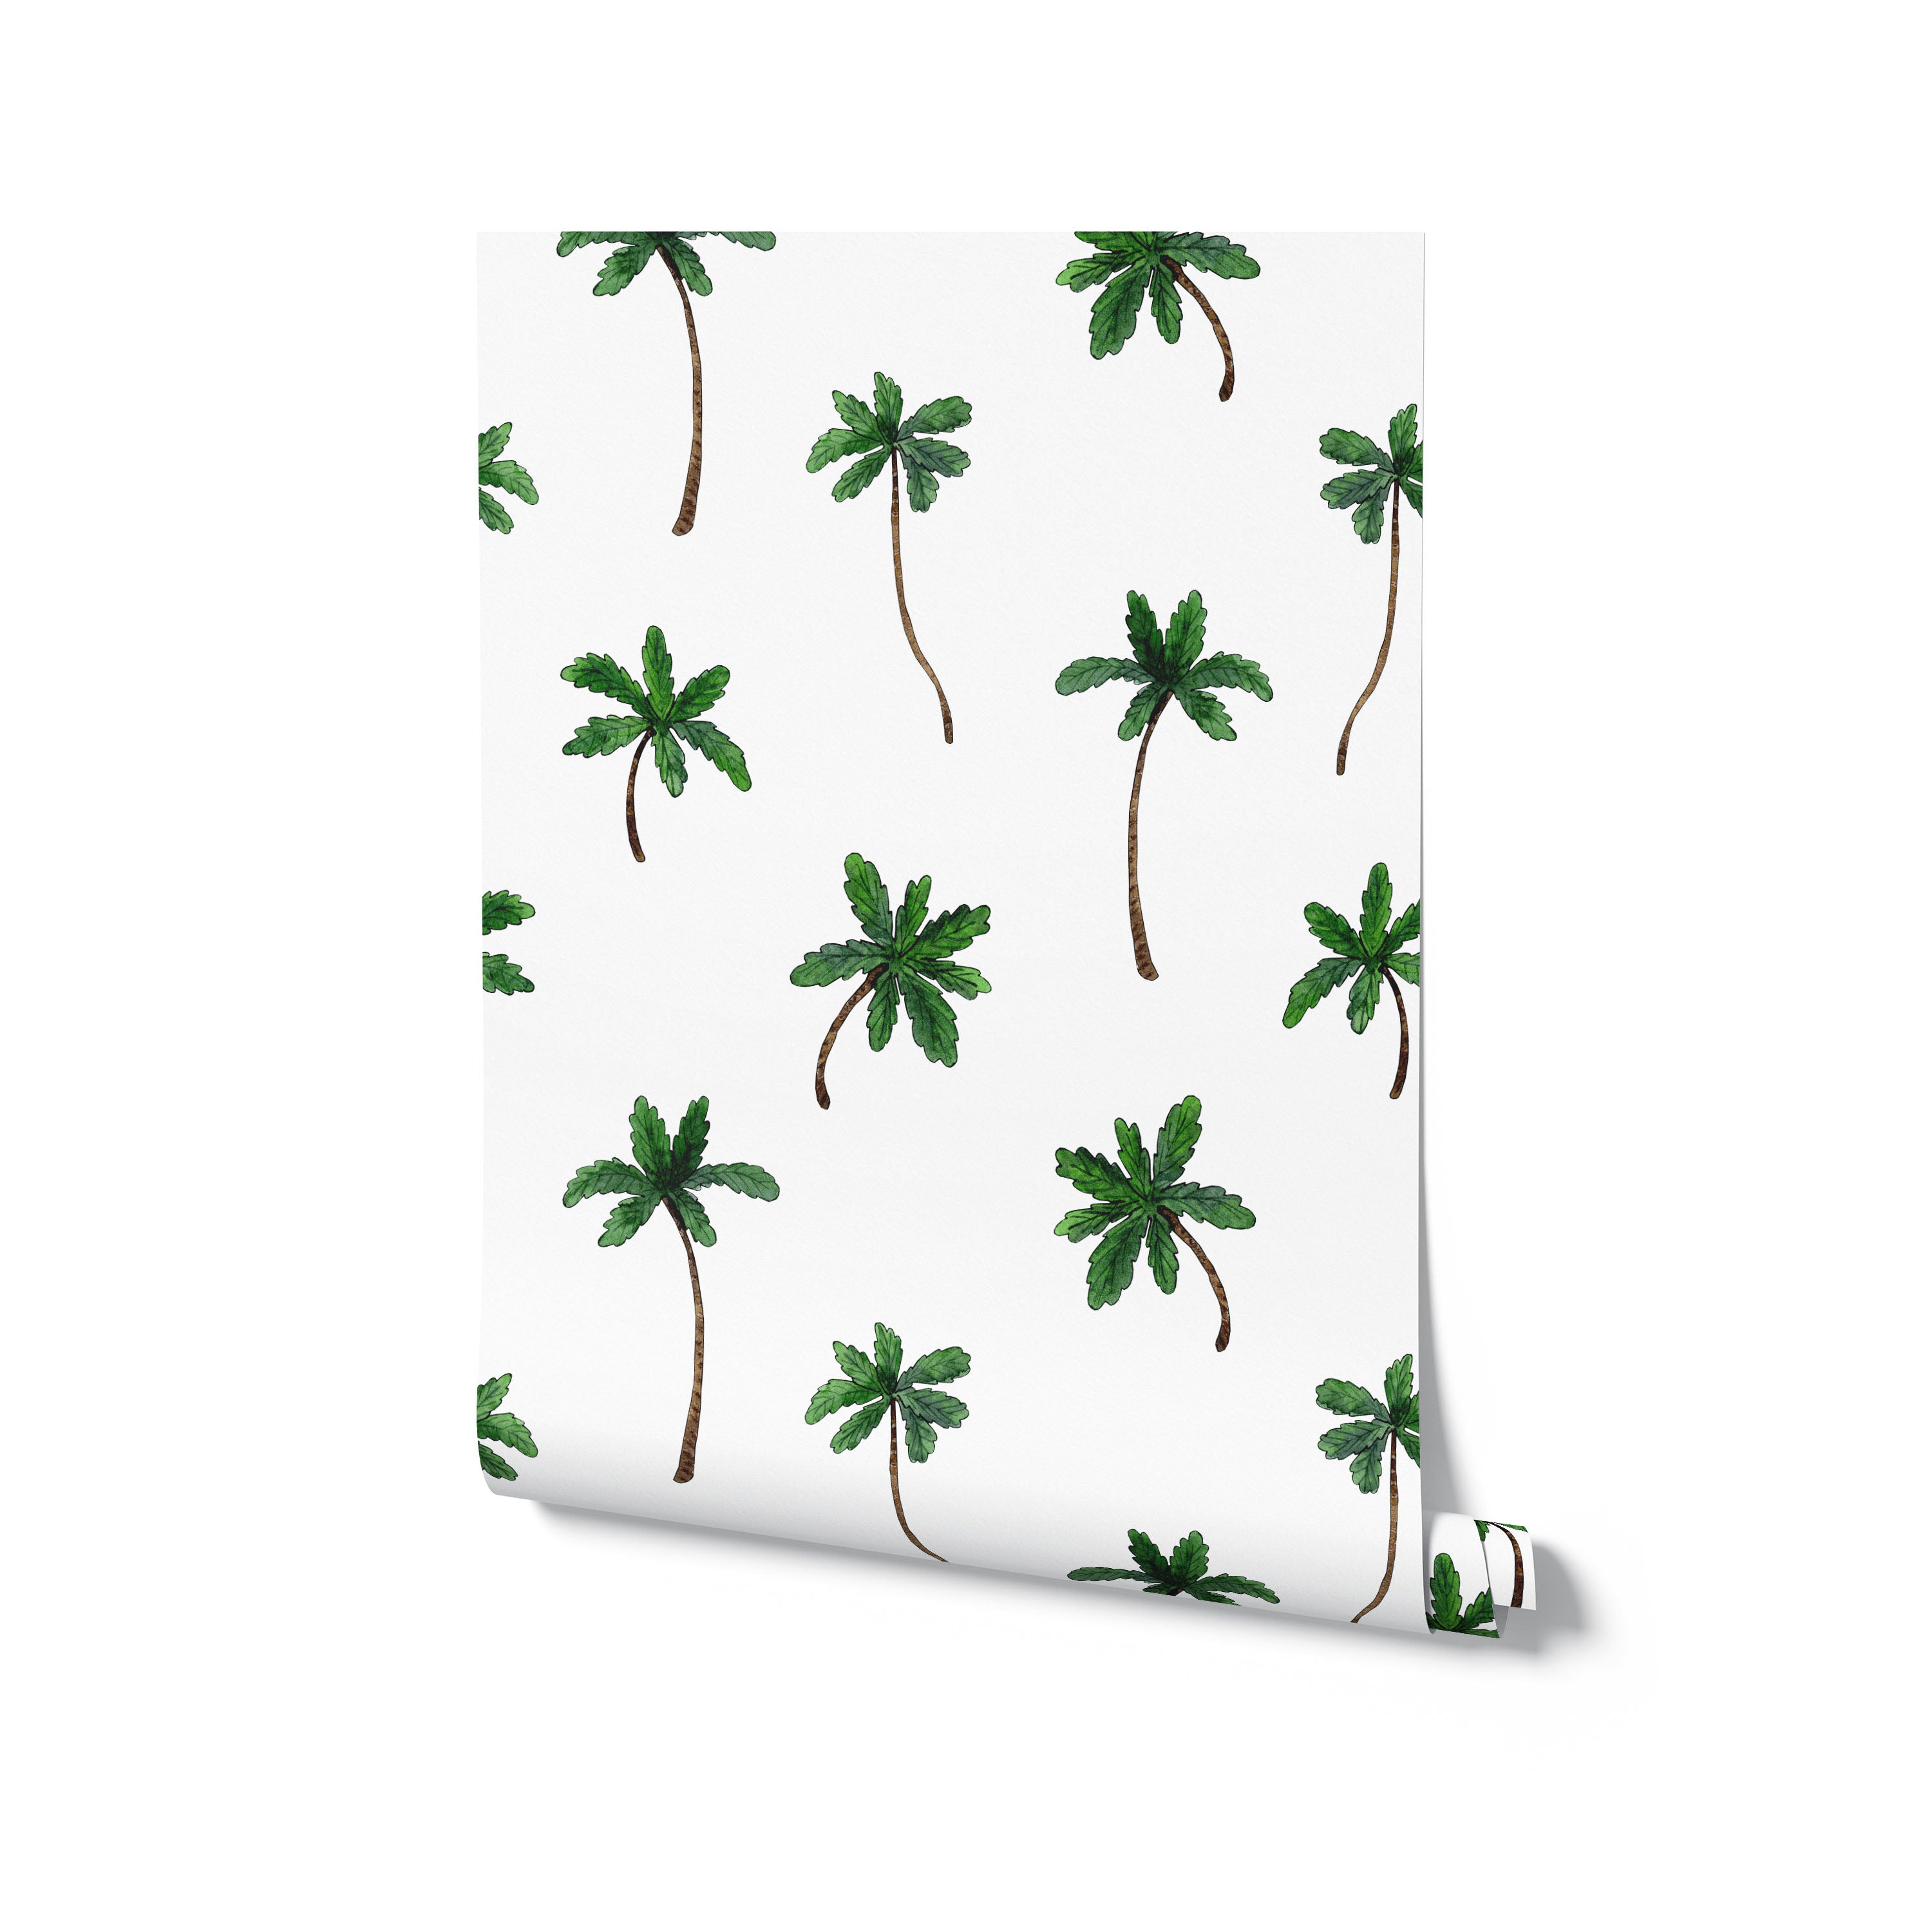 A rolled panel of the Island Breeze Wallpaper displaying the repeating pattern of green palm trees, perfect for adding a tropical vibe to any room.